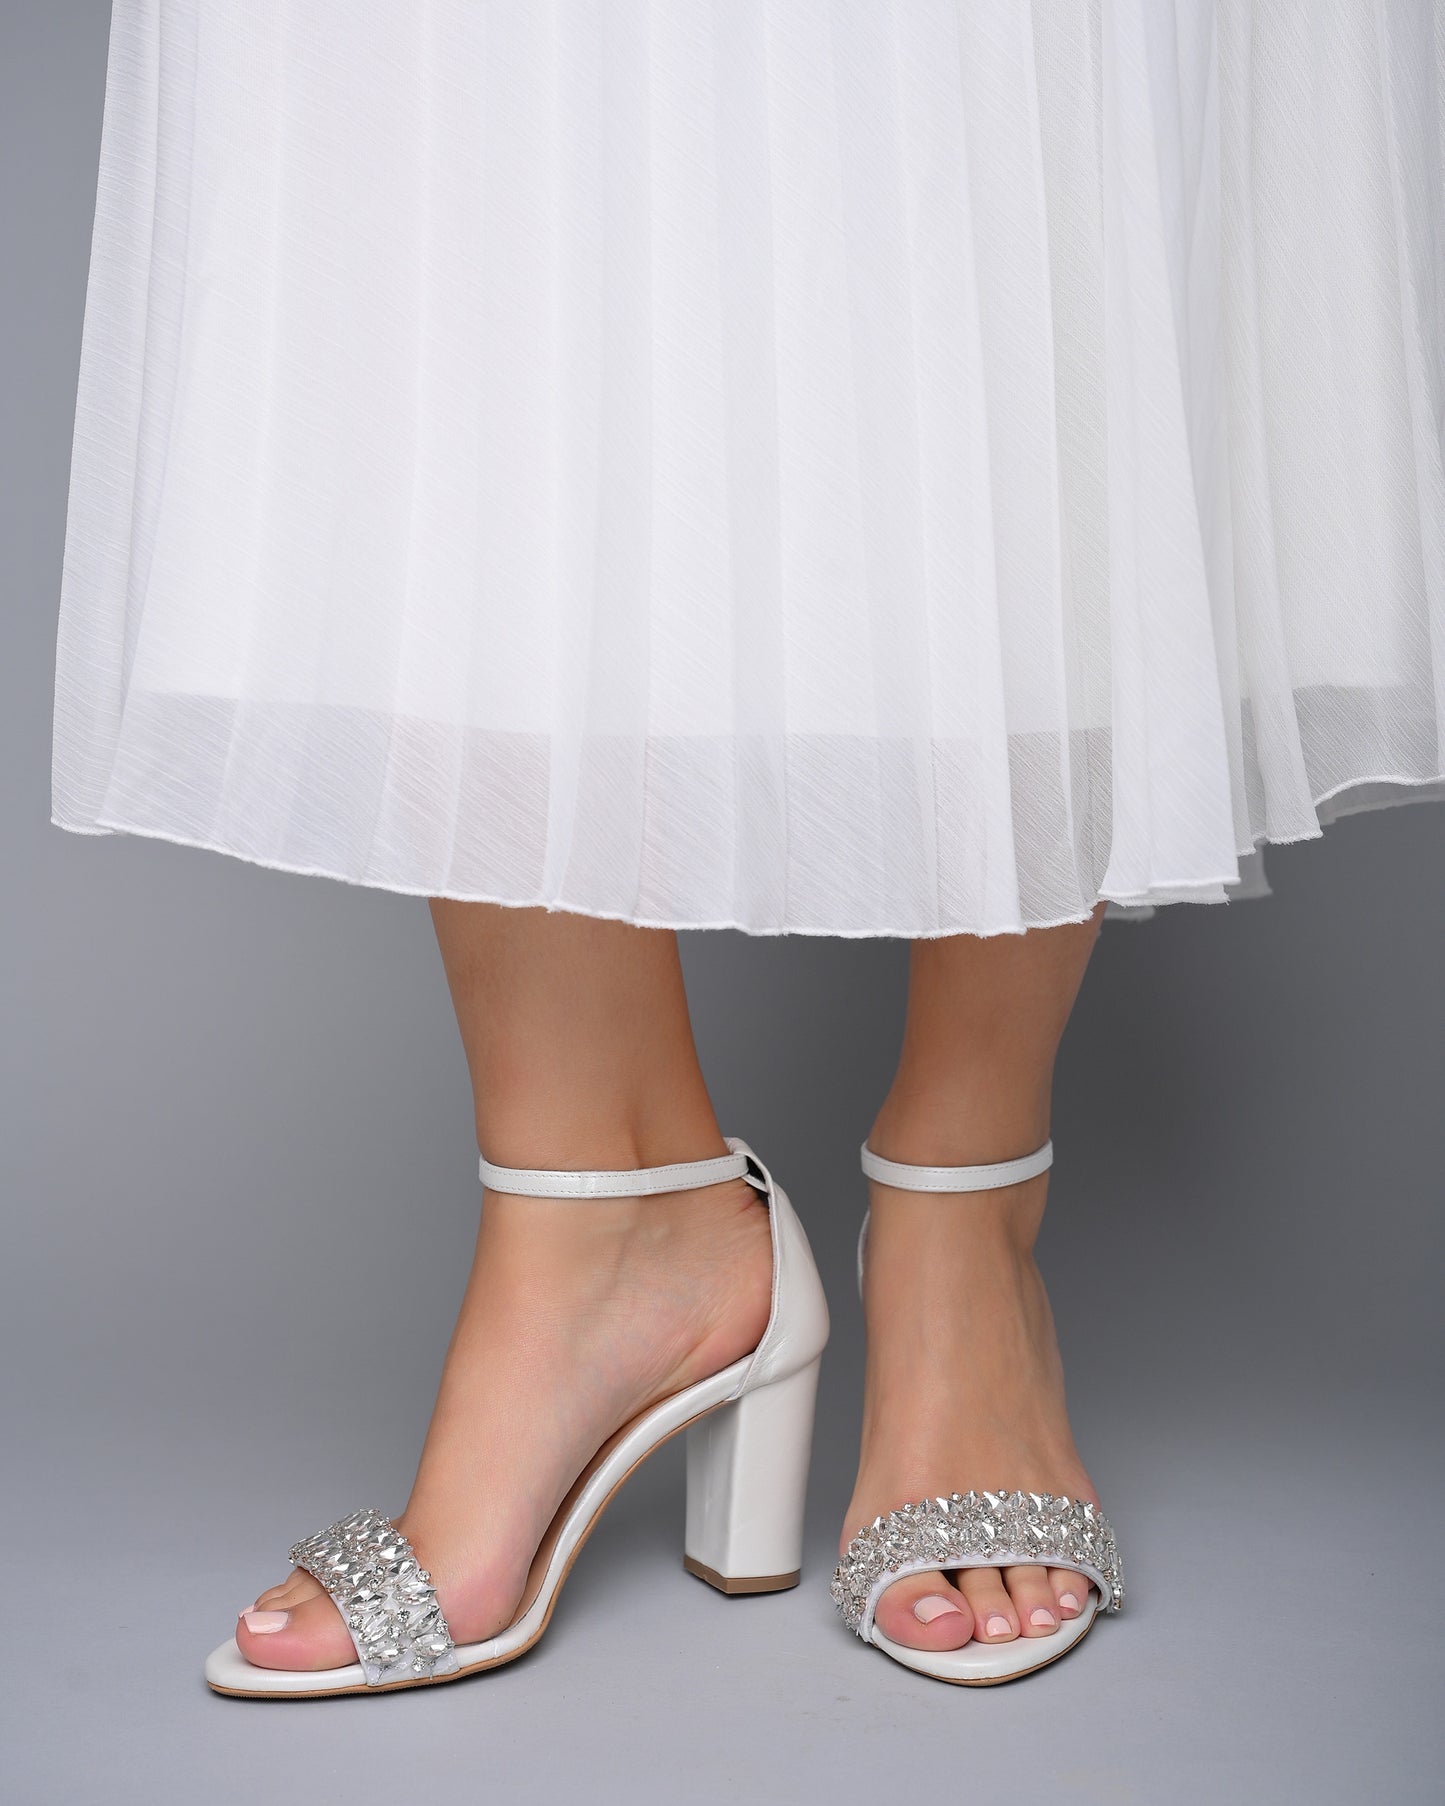 bridal shoes for wedding